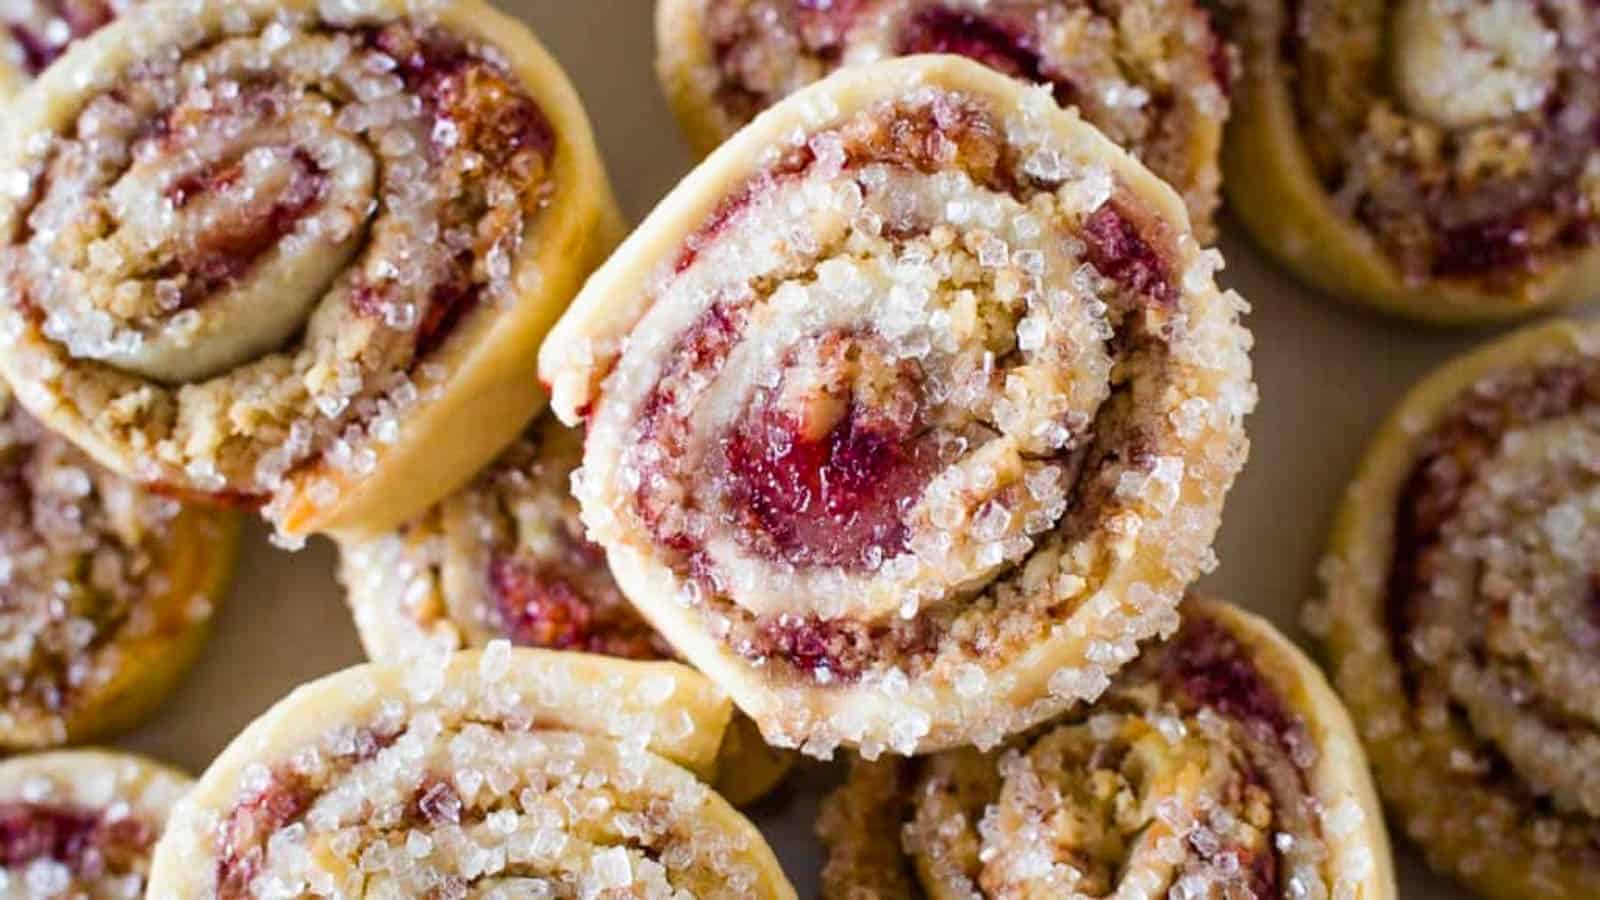 Top view of raspberry pinwheel cookies topped with sparkling sugar.